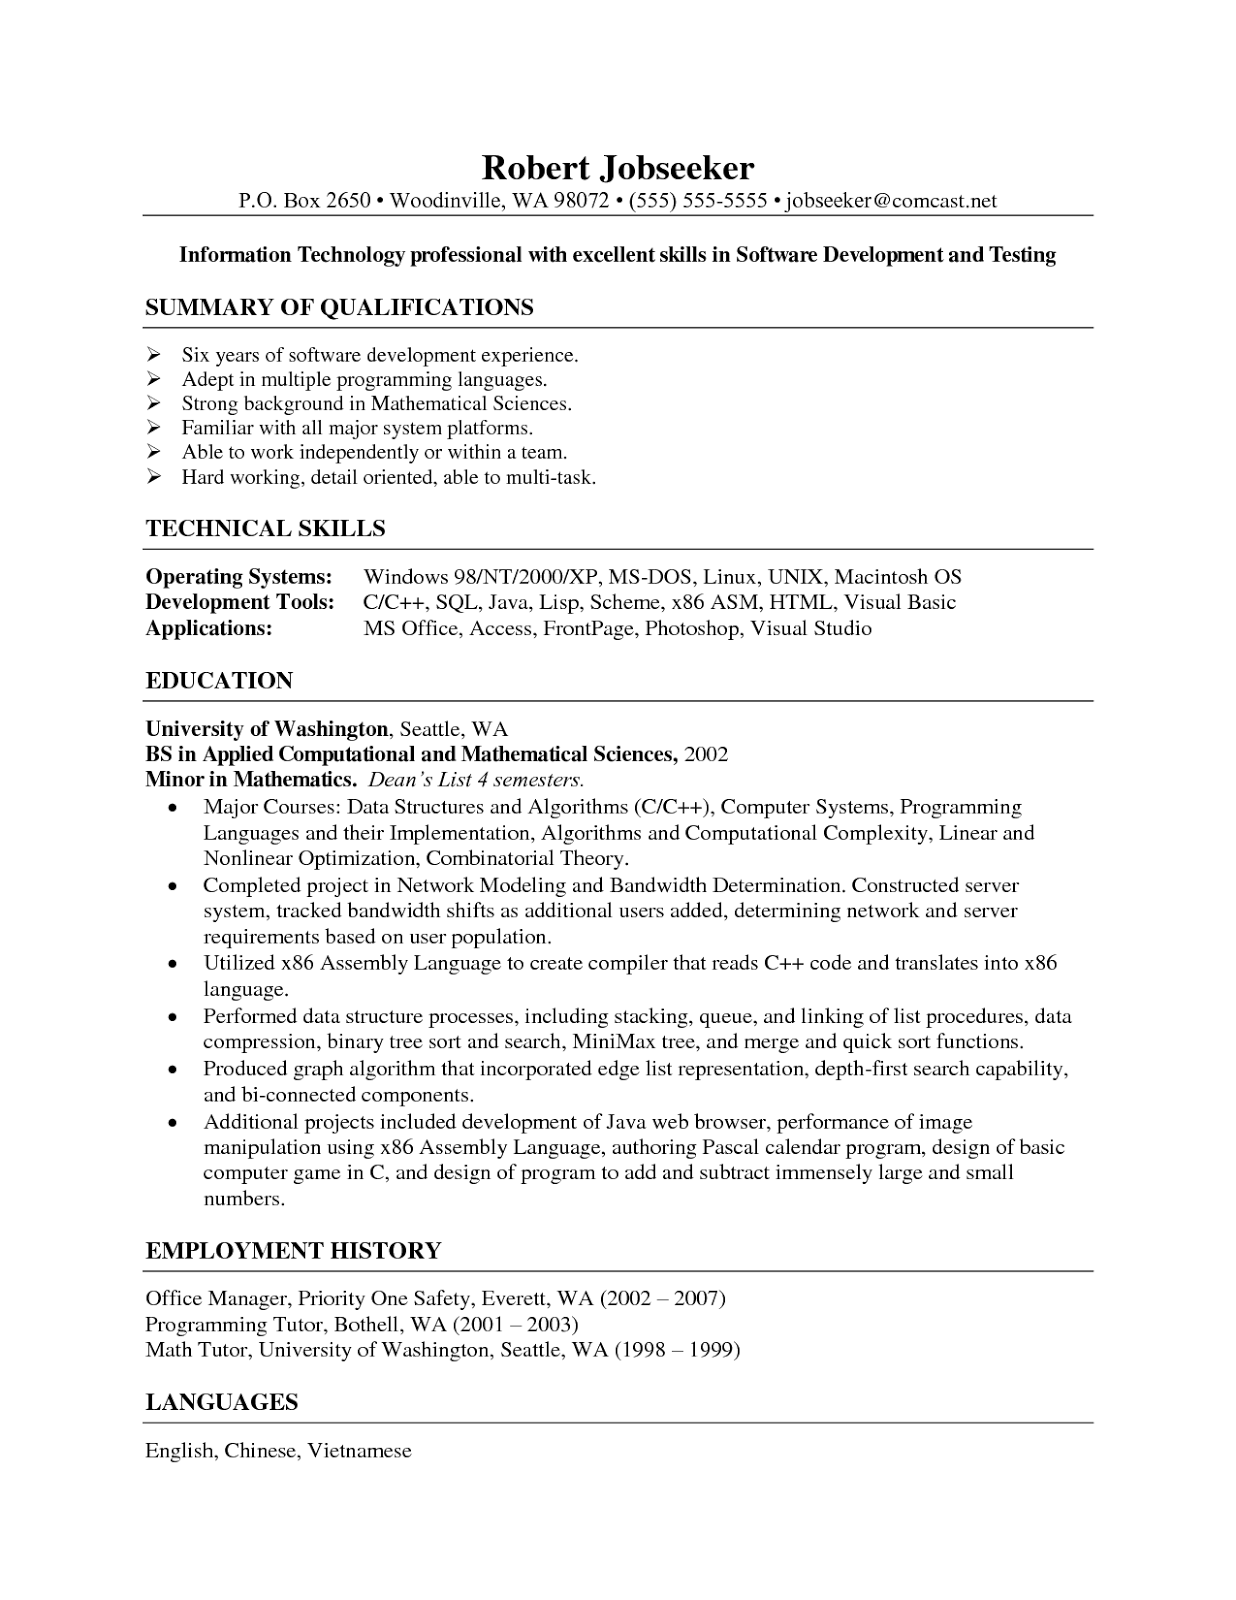 Outstanding resume cover letters